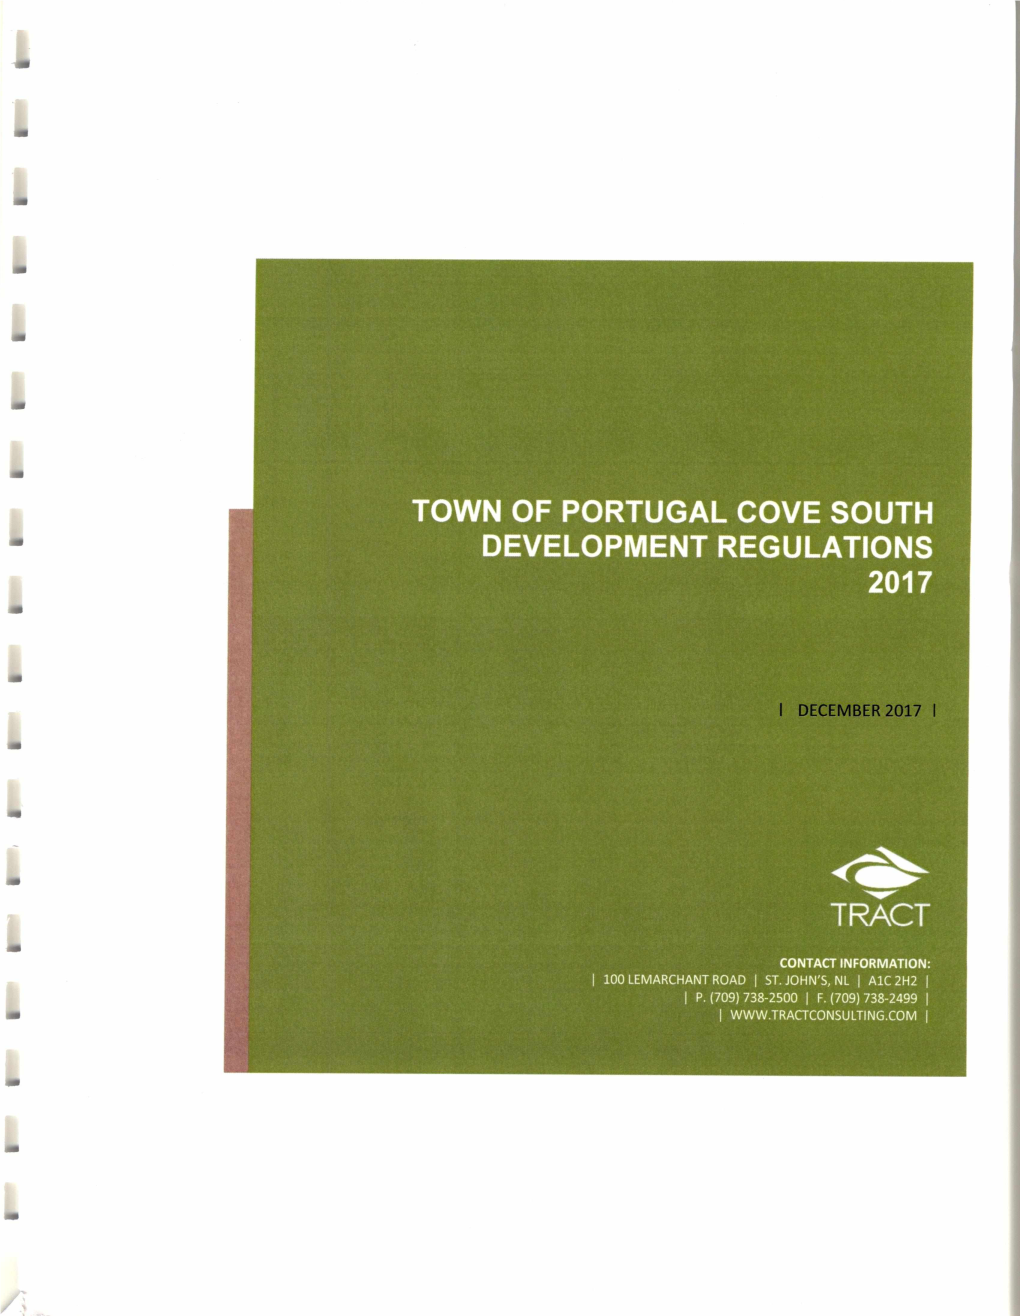 Town of Portugal Cove South Development Regulations 2017